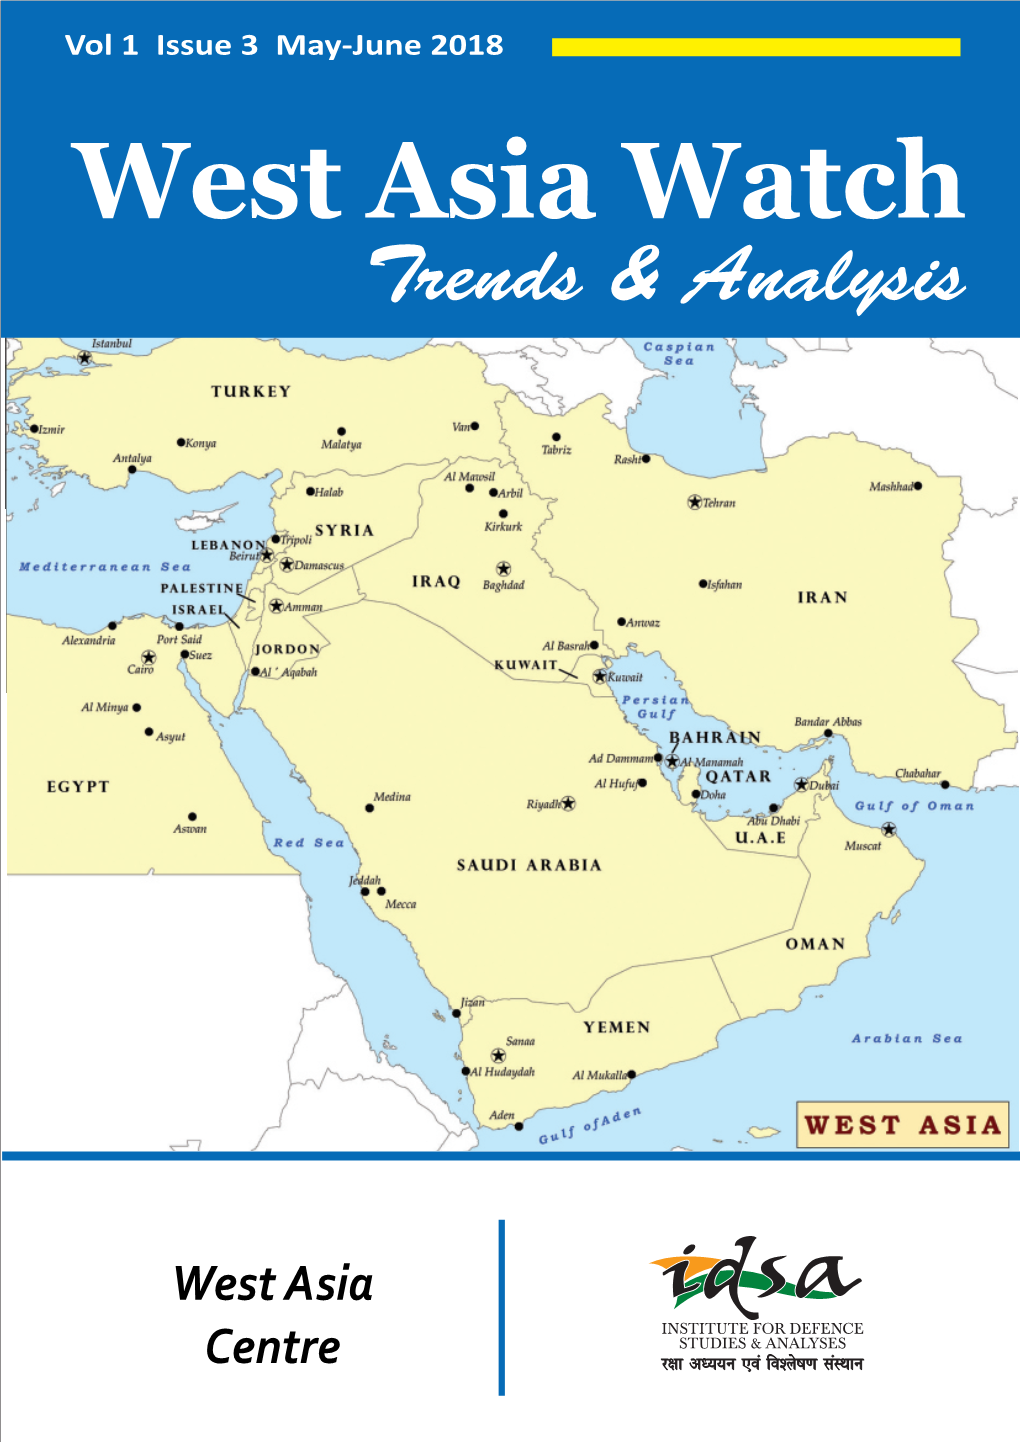 May-June 2018 West Asia Watch Trends & Analysis